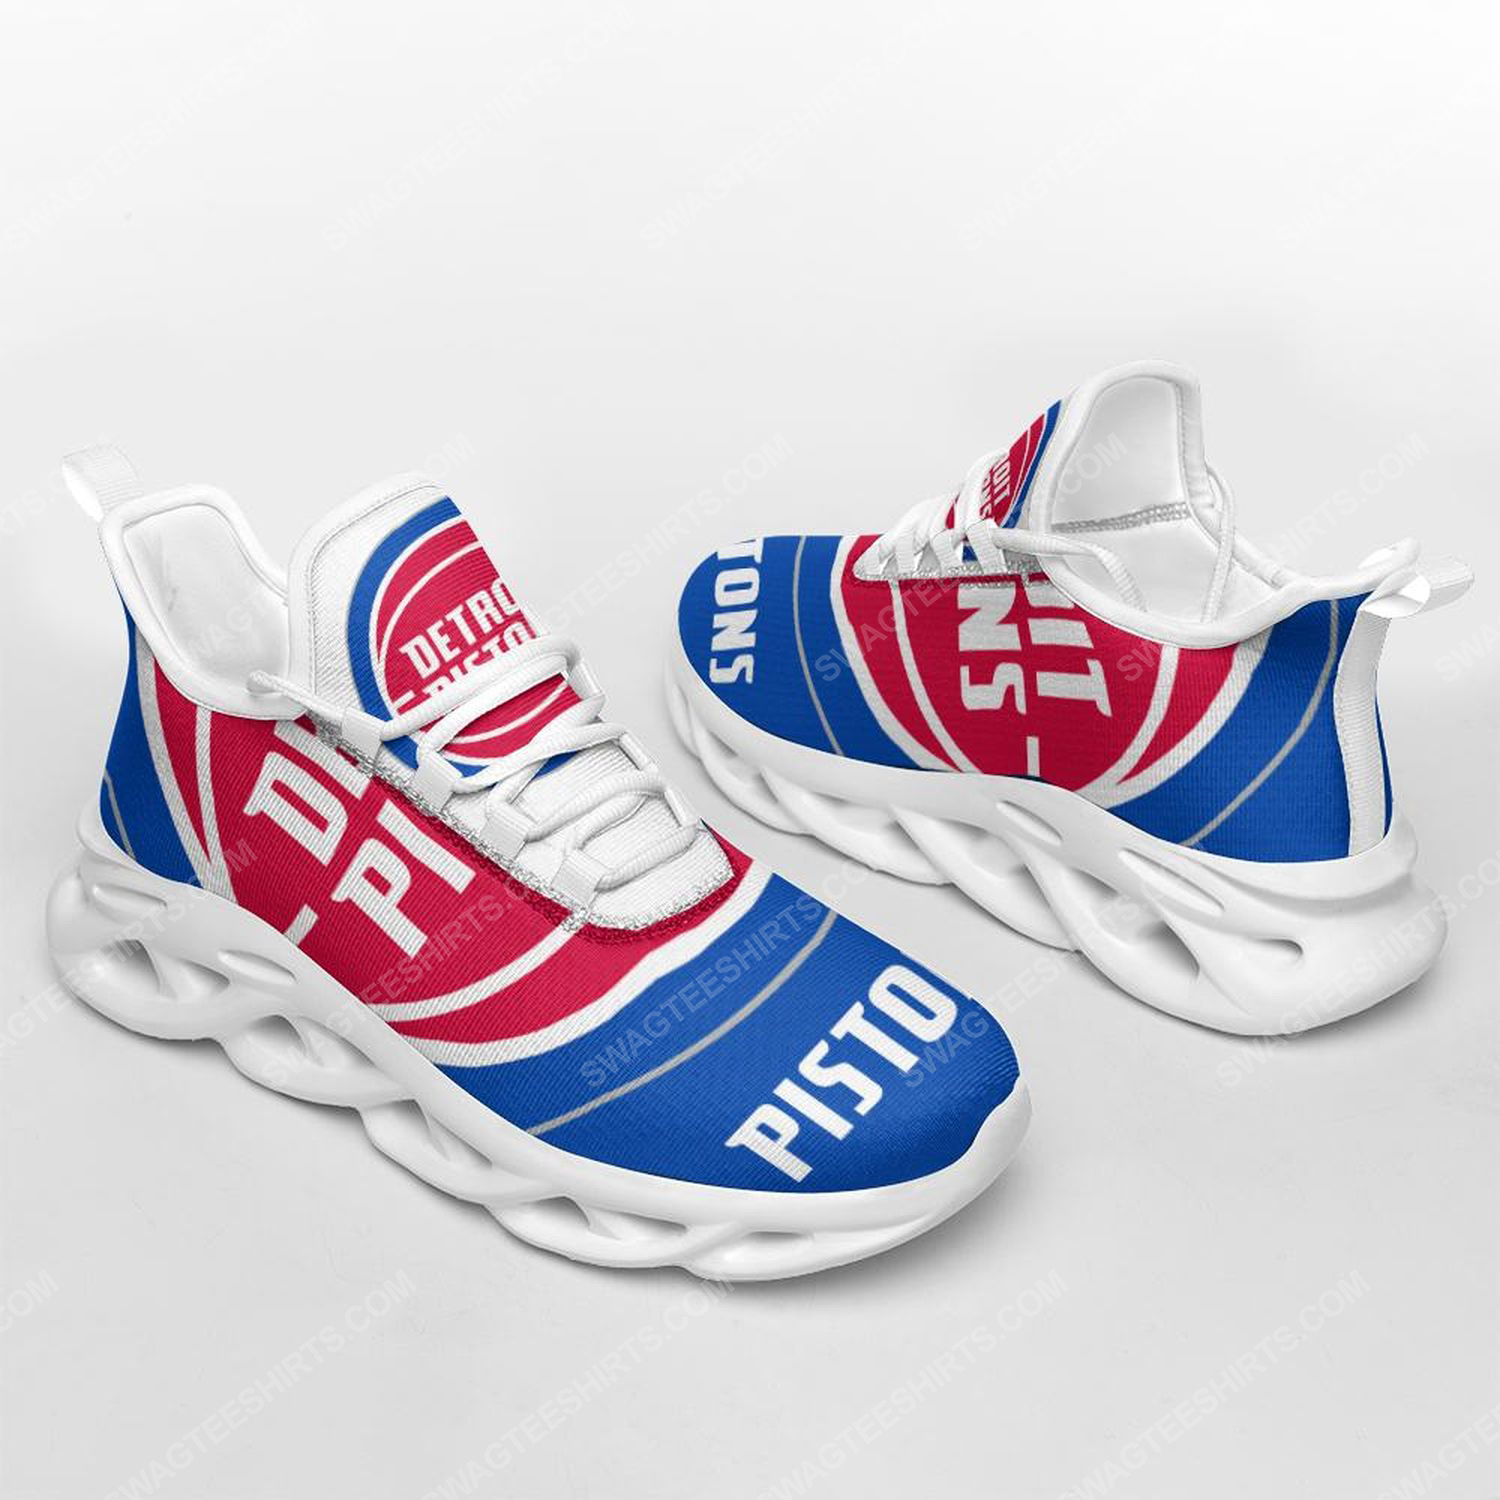 [special edition] The detroit pistons basketball team max soul shoes – Maria